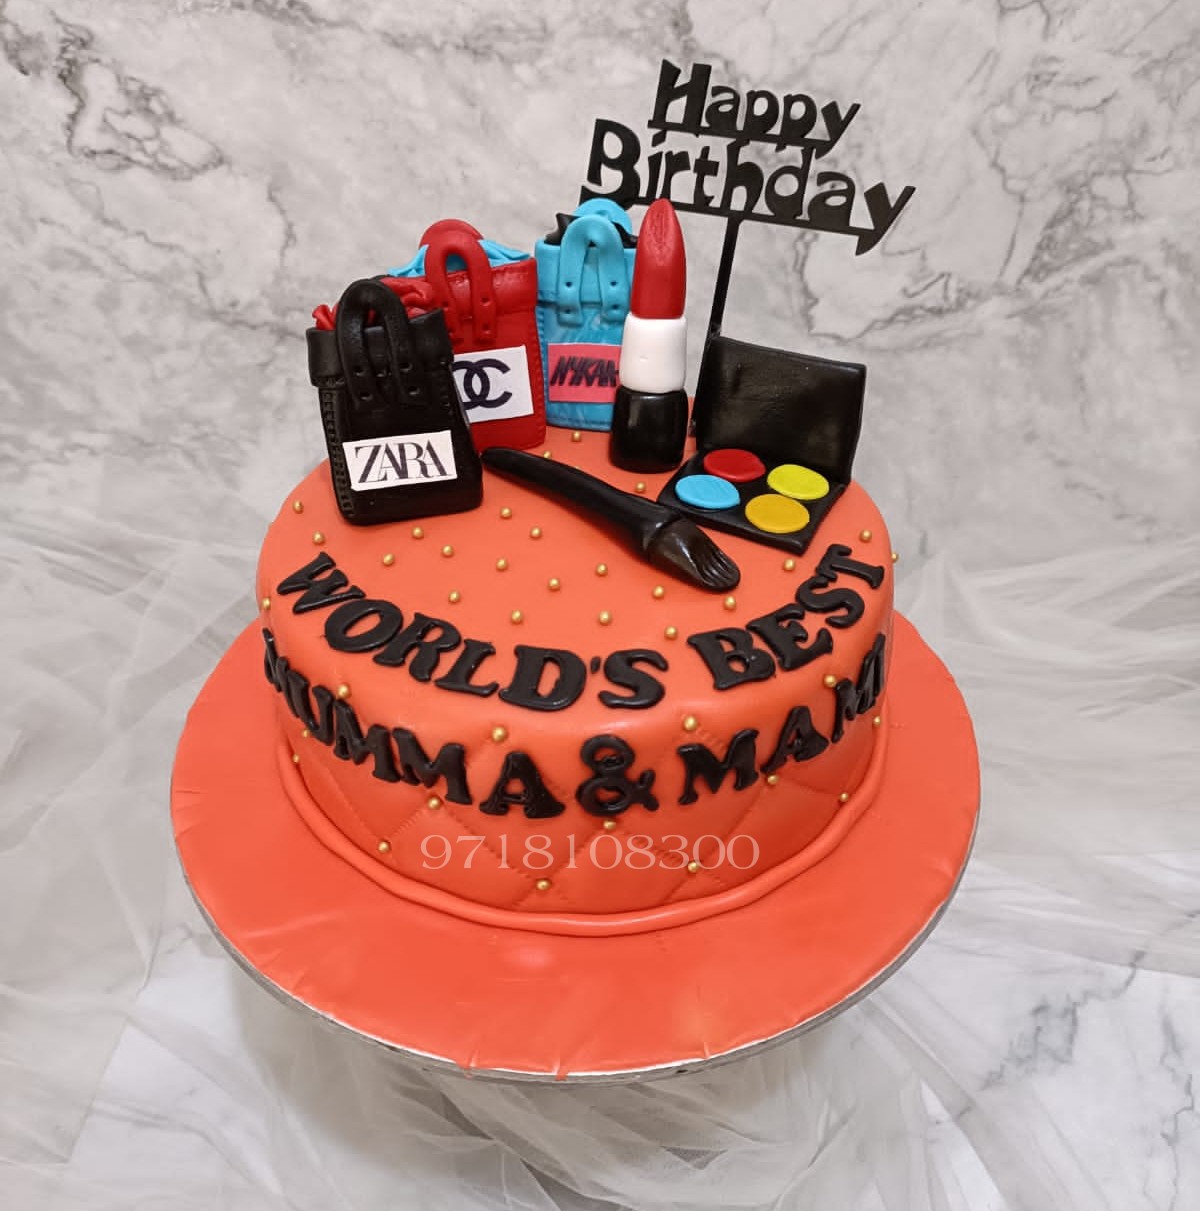 Order Makeup Theme Cake 1 Kg Online at Best Price, Free Delivery|IGP Cakes